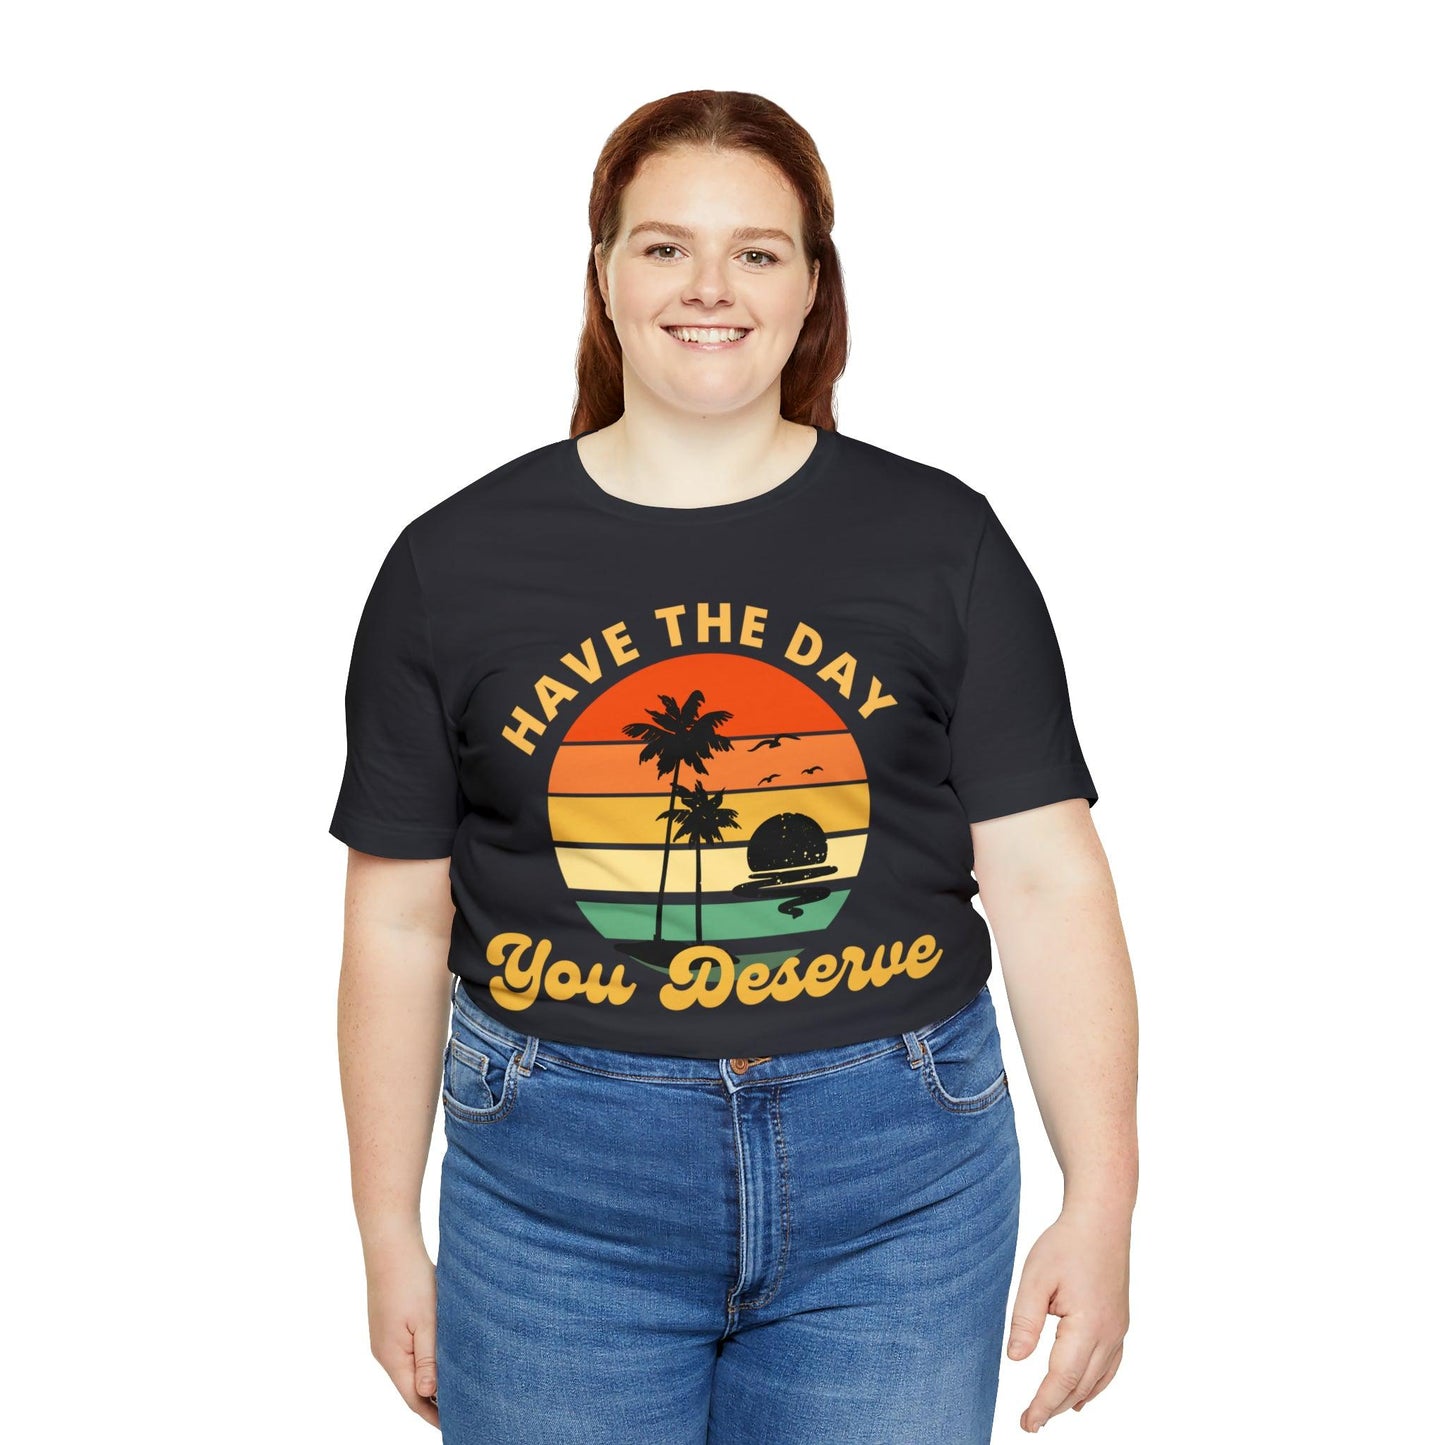 Have the Day You Deserve T-Shirt, Inspirational Graphic Tee, Motivational Tee, Positive Vibes Shirt, Trendy shirt and Eye Catching shirt